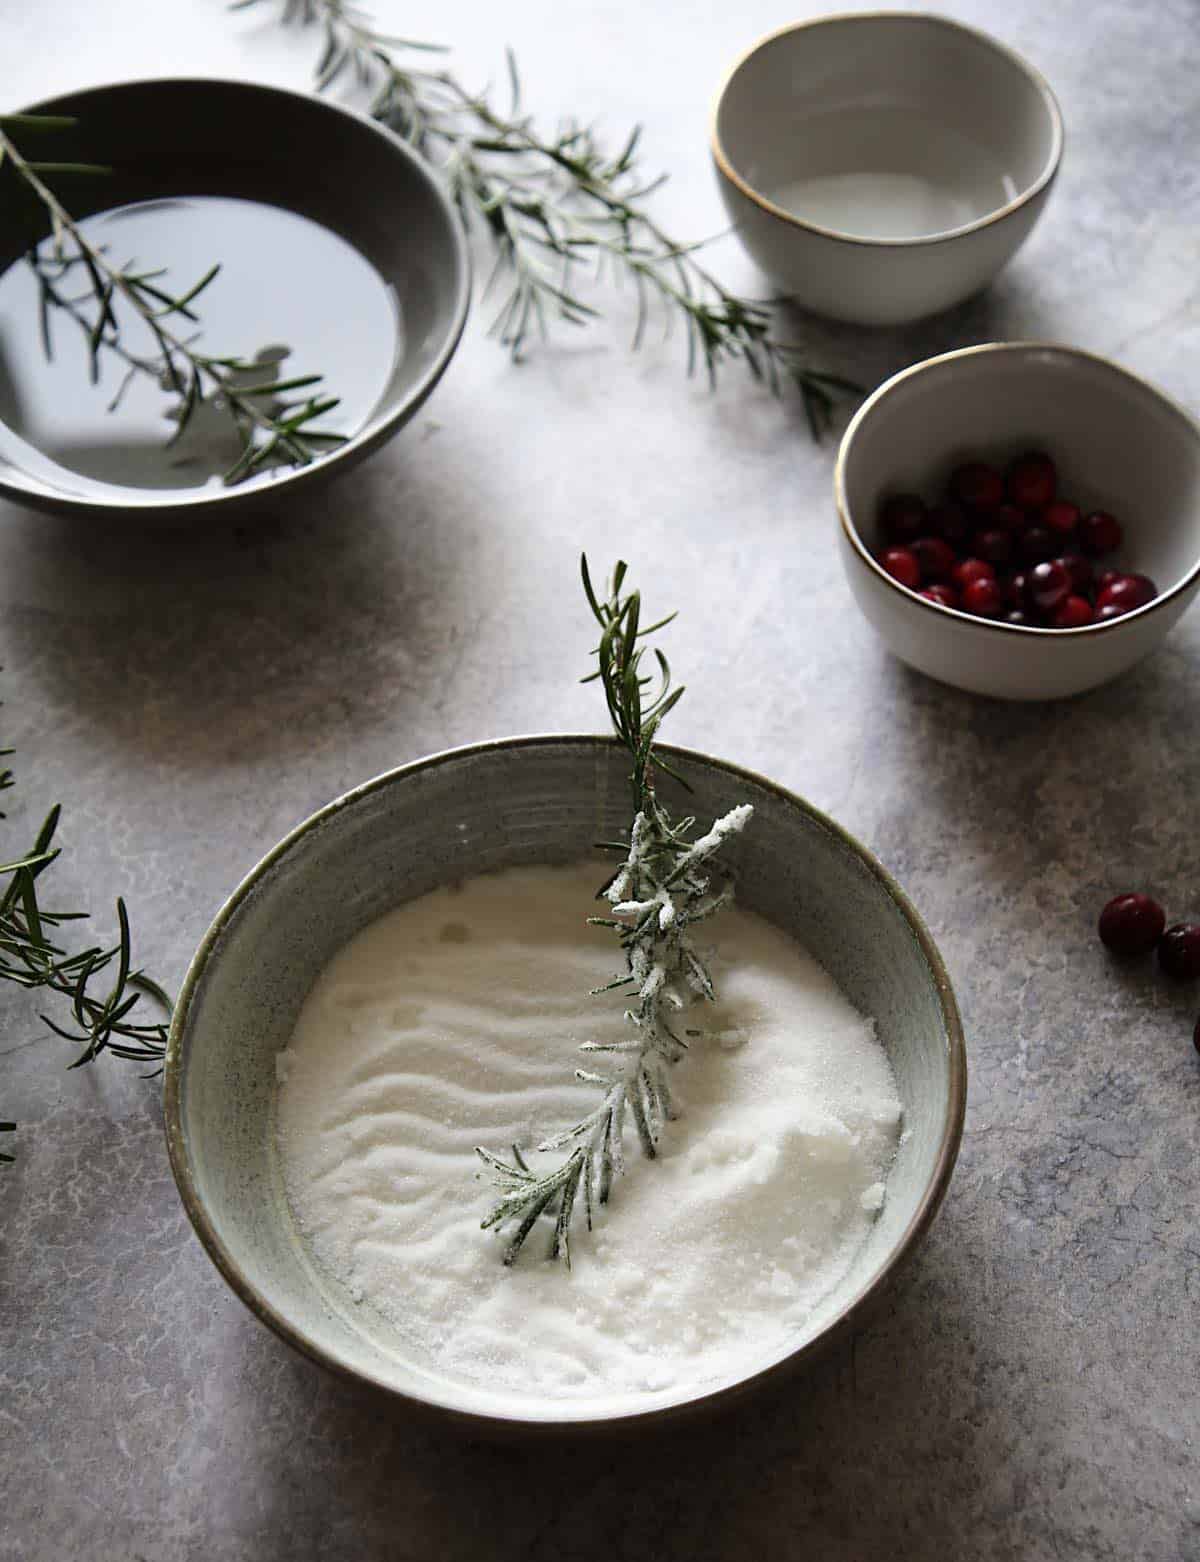 rosemary sprigs dipped in bowls of water and sugar along with cranberries